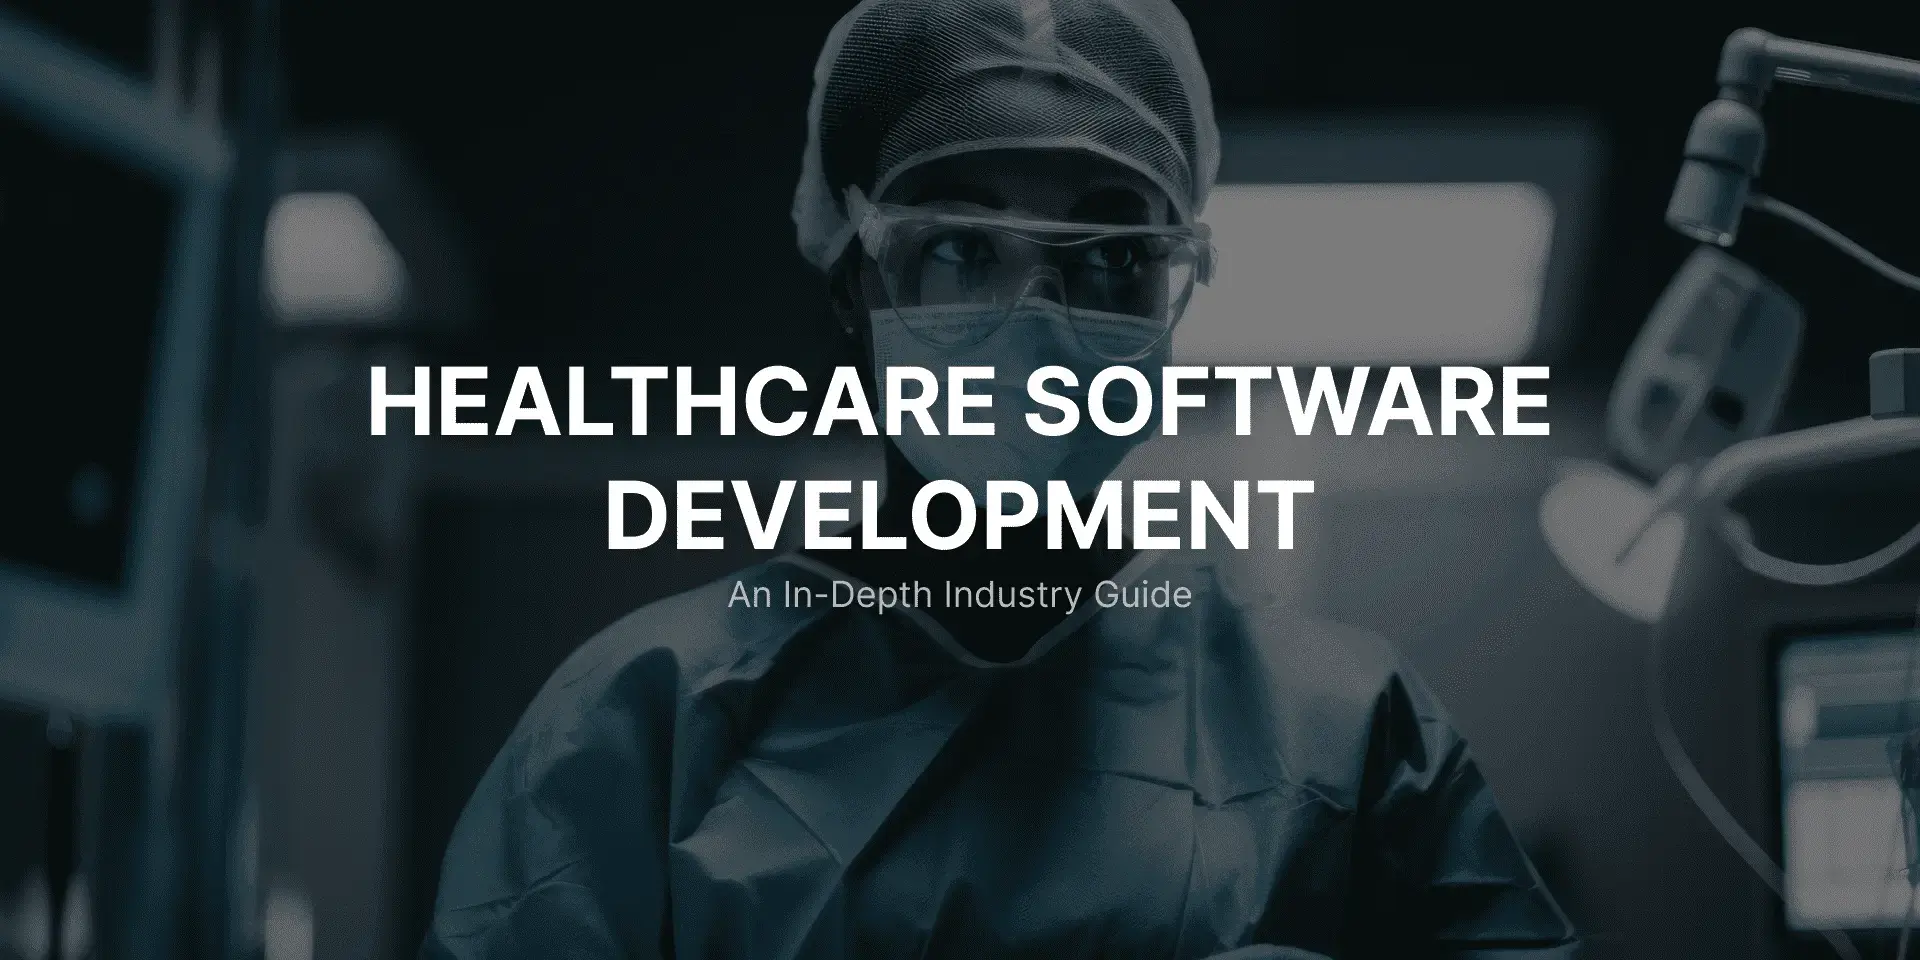 Healthcare Software Development 2023: An In-Depth Industry Guide